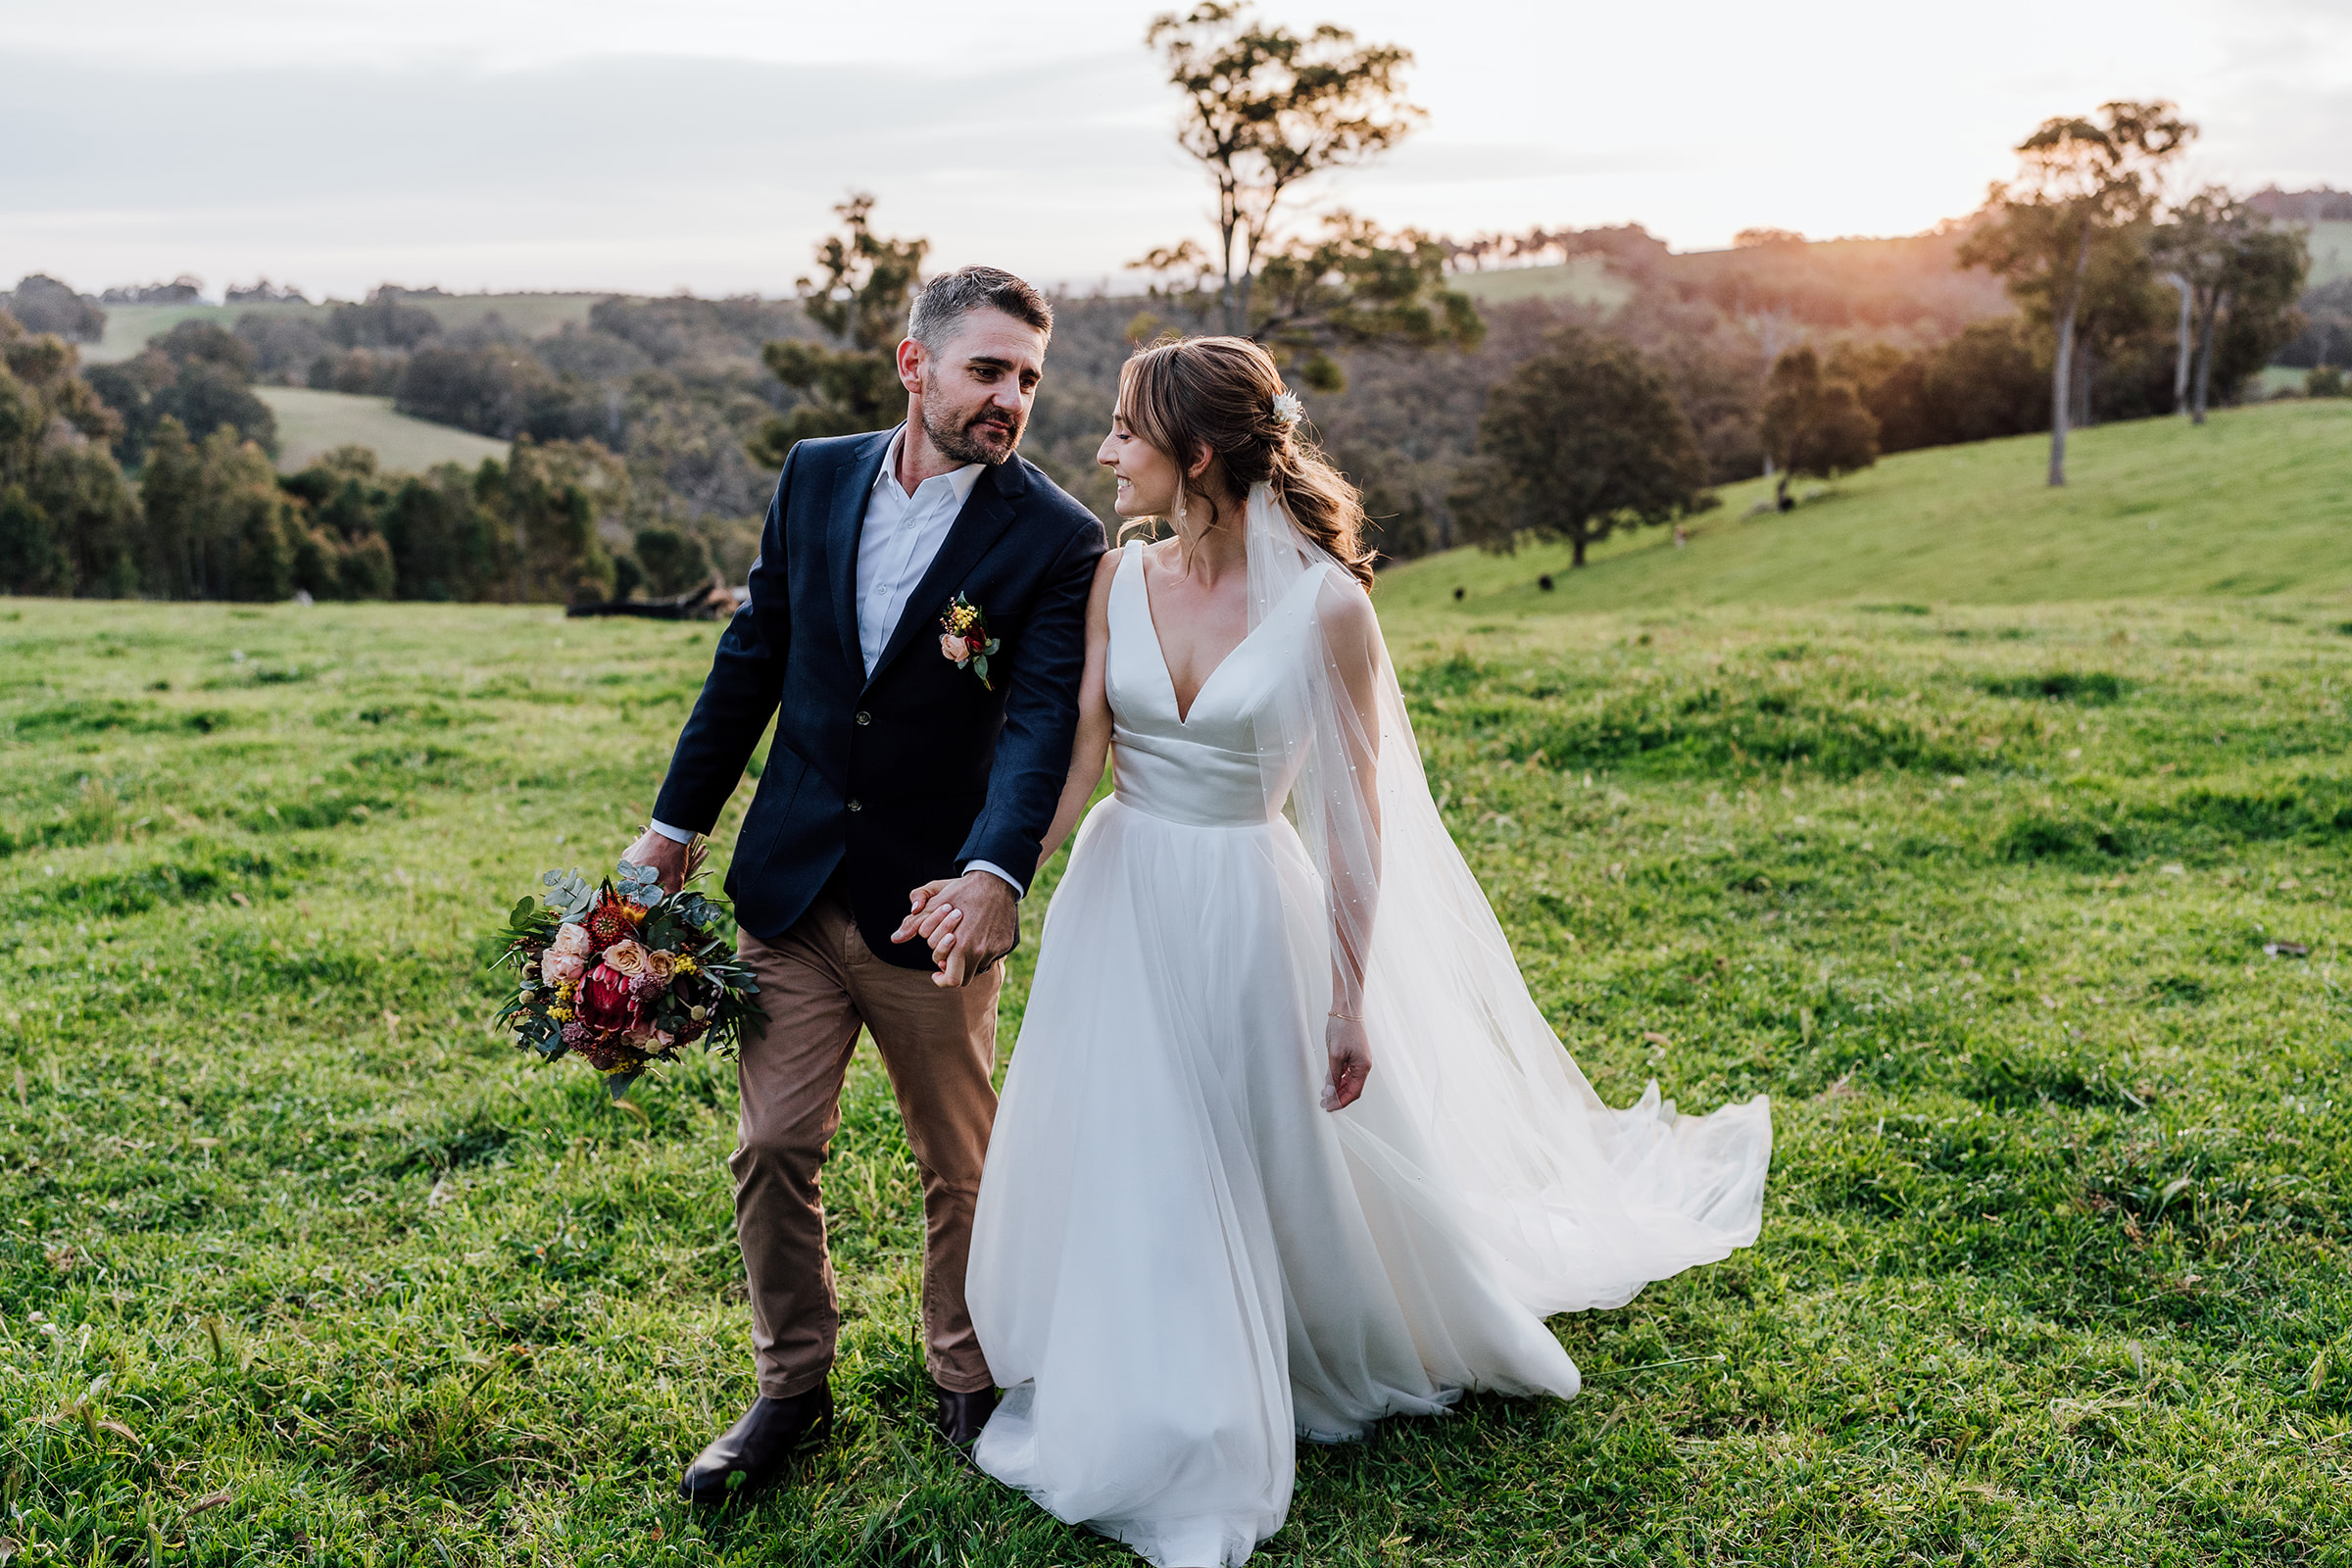 An Edith Valley Wedding in the picturesque South West hills